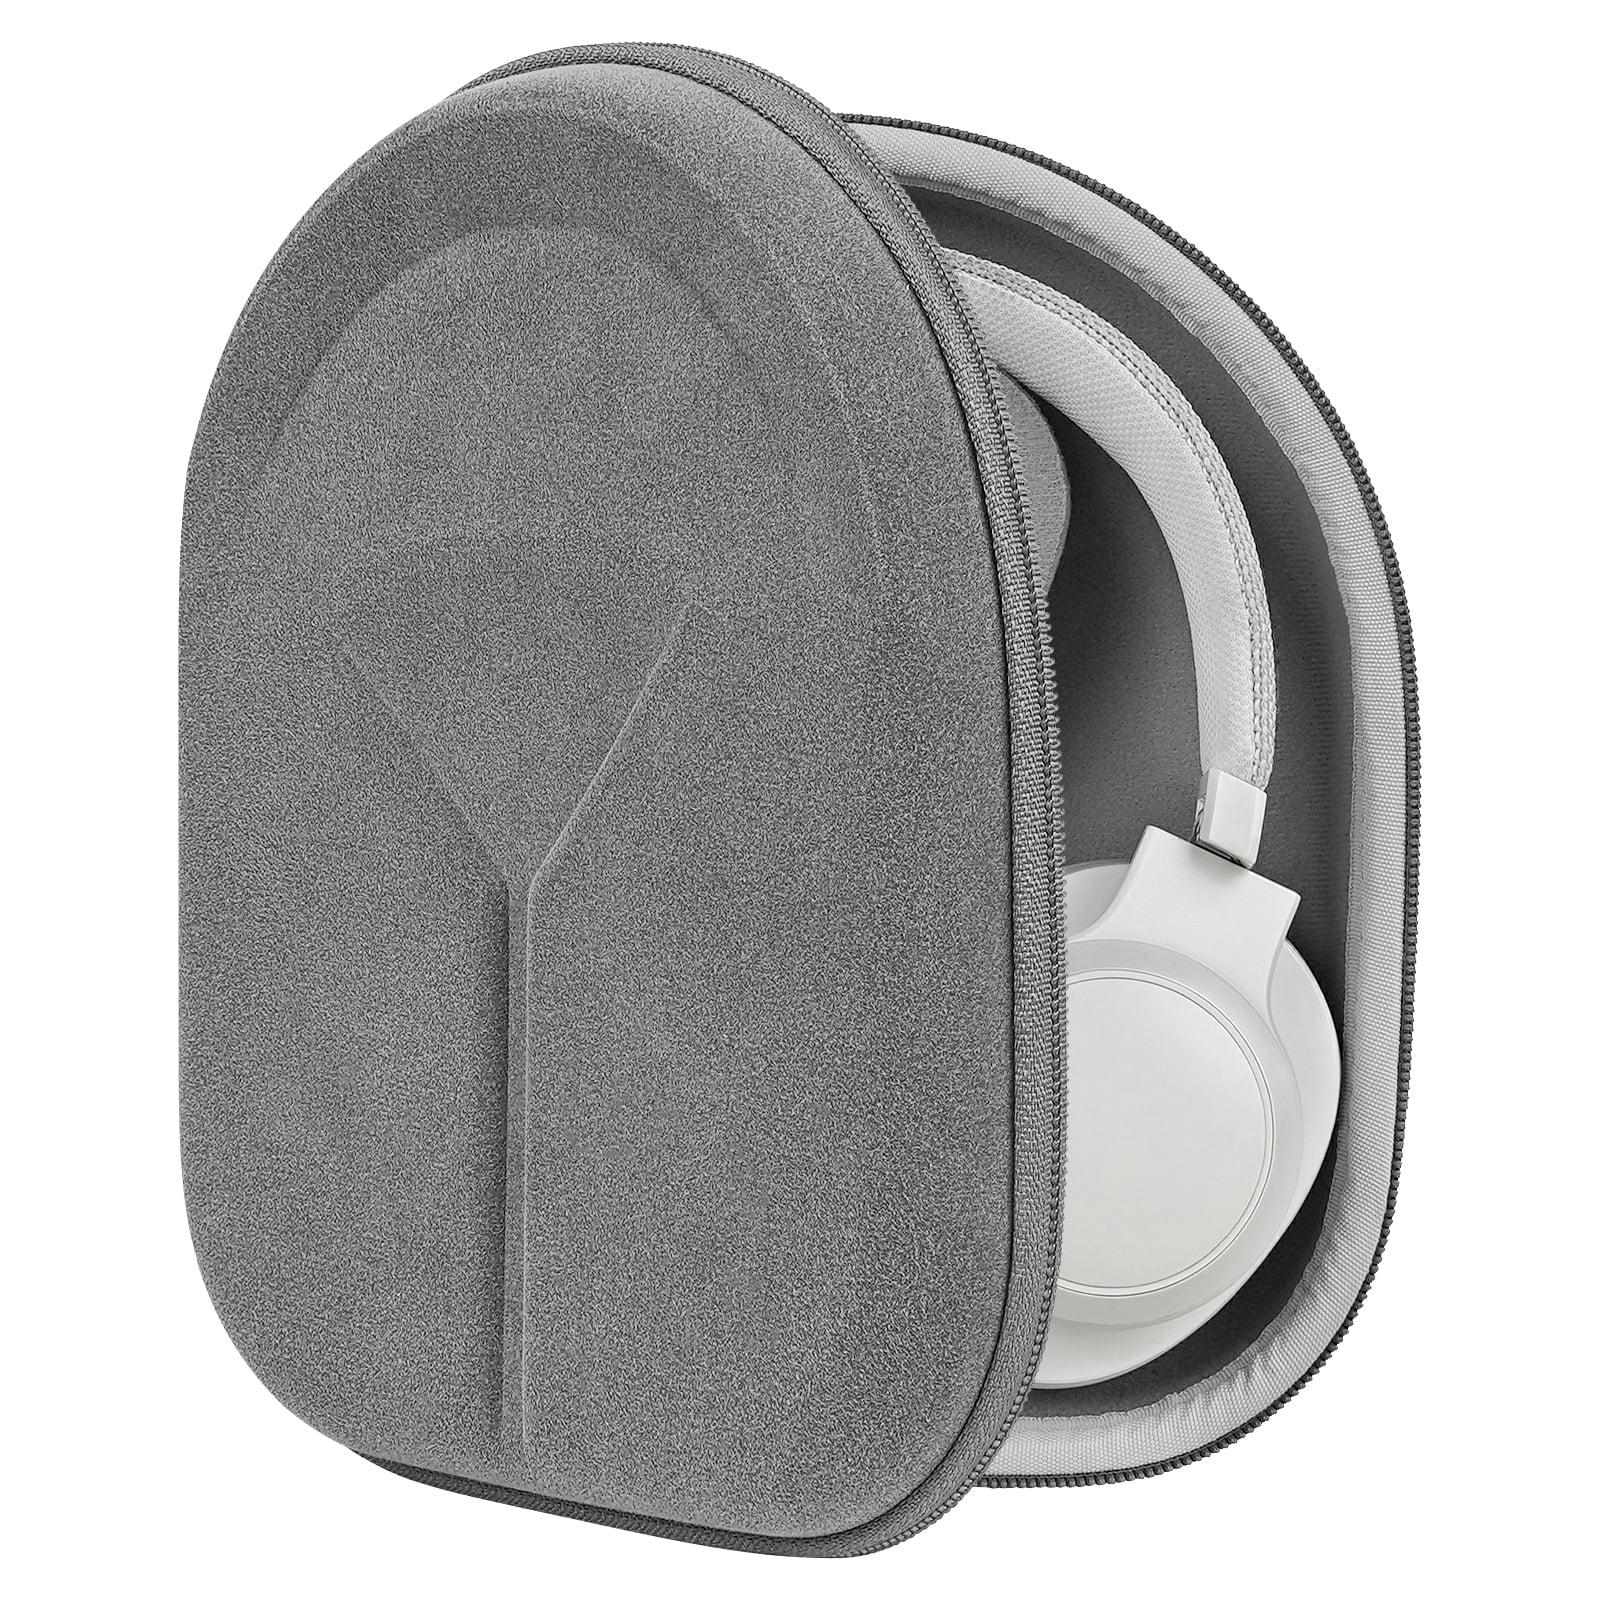 Geekria Shield Headphones Case Compatible with JBL LIVE 500BT